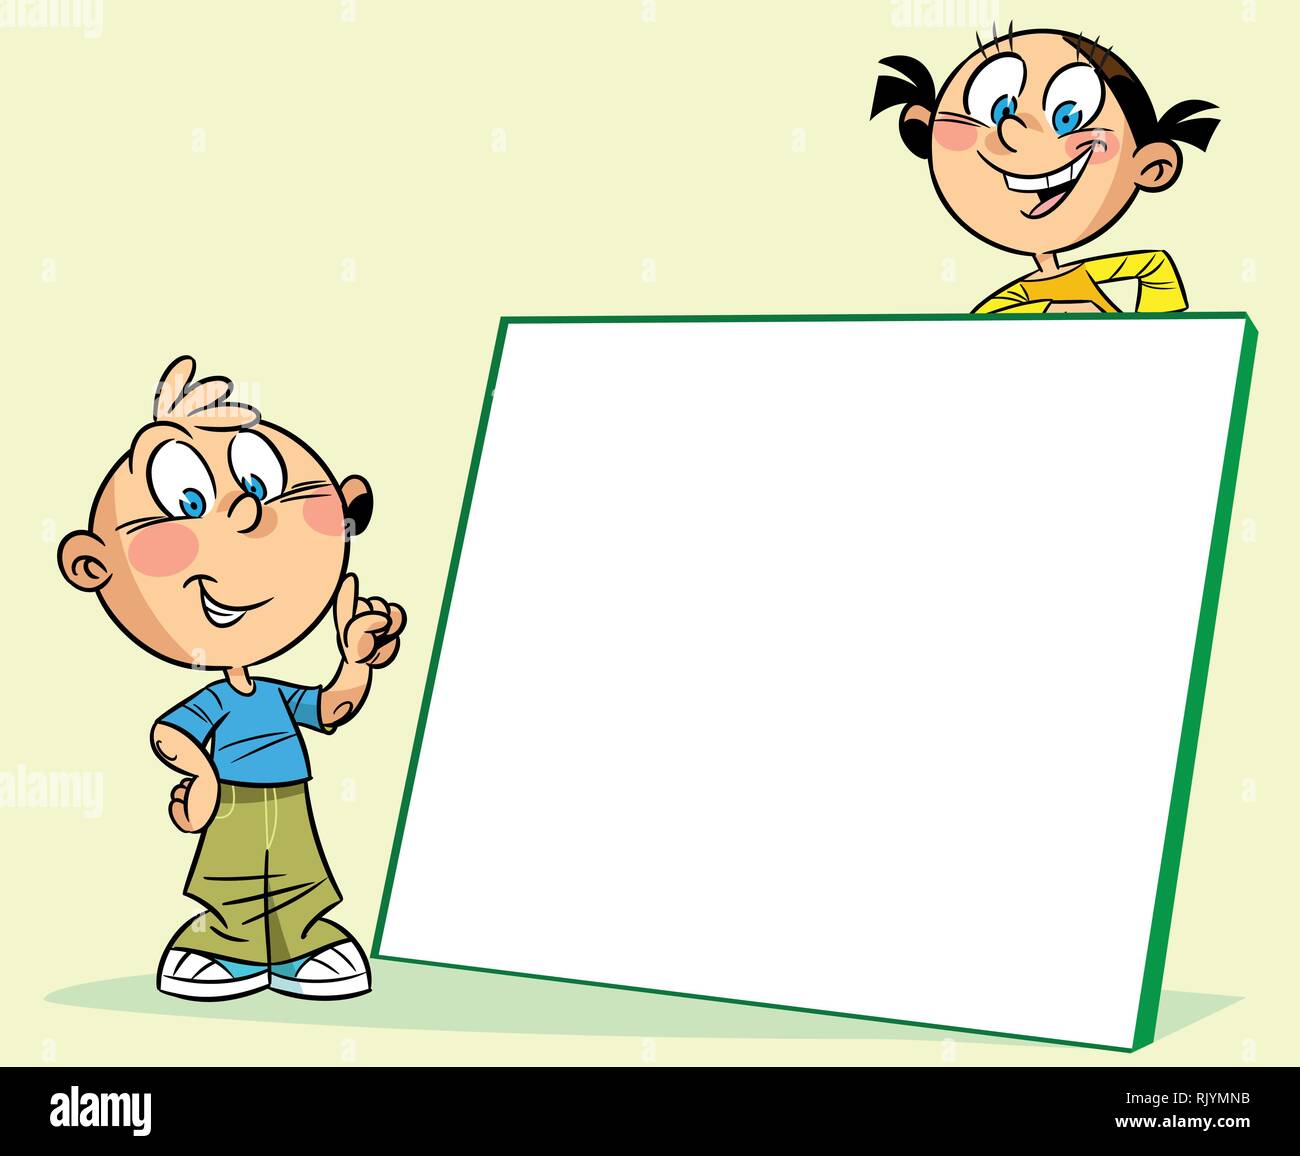 The illustration shows a boy and a girl, standing near a white board. The boy points a finger on the board. Done in cartoon style, on separate layers Stock Vector